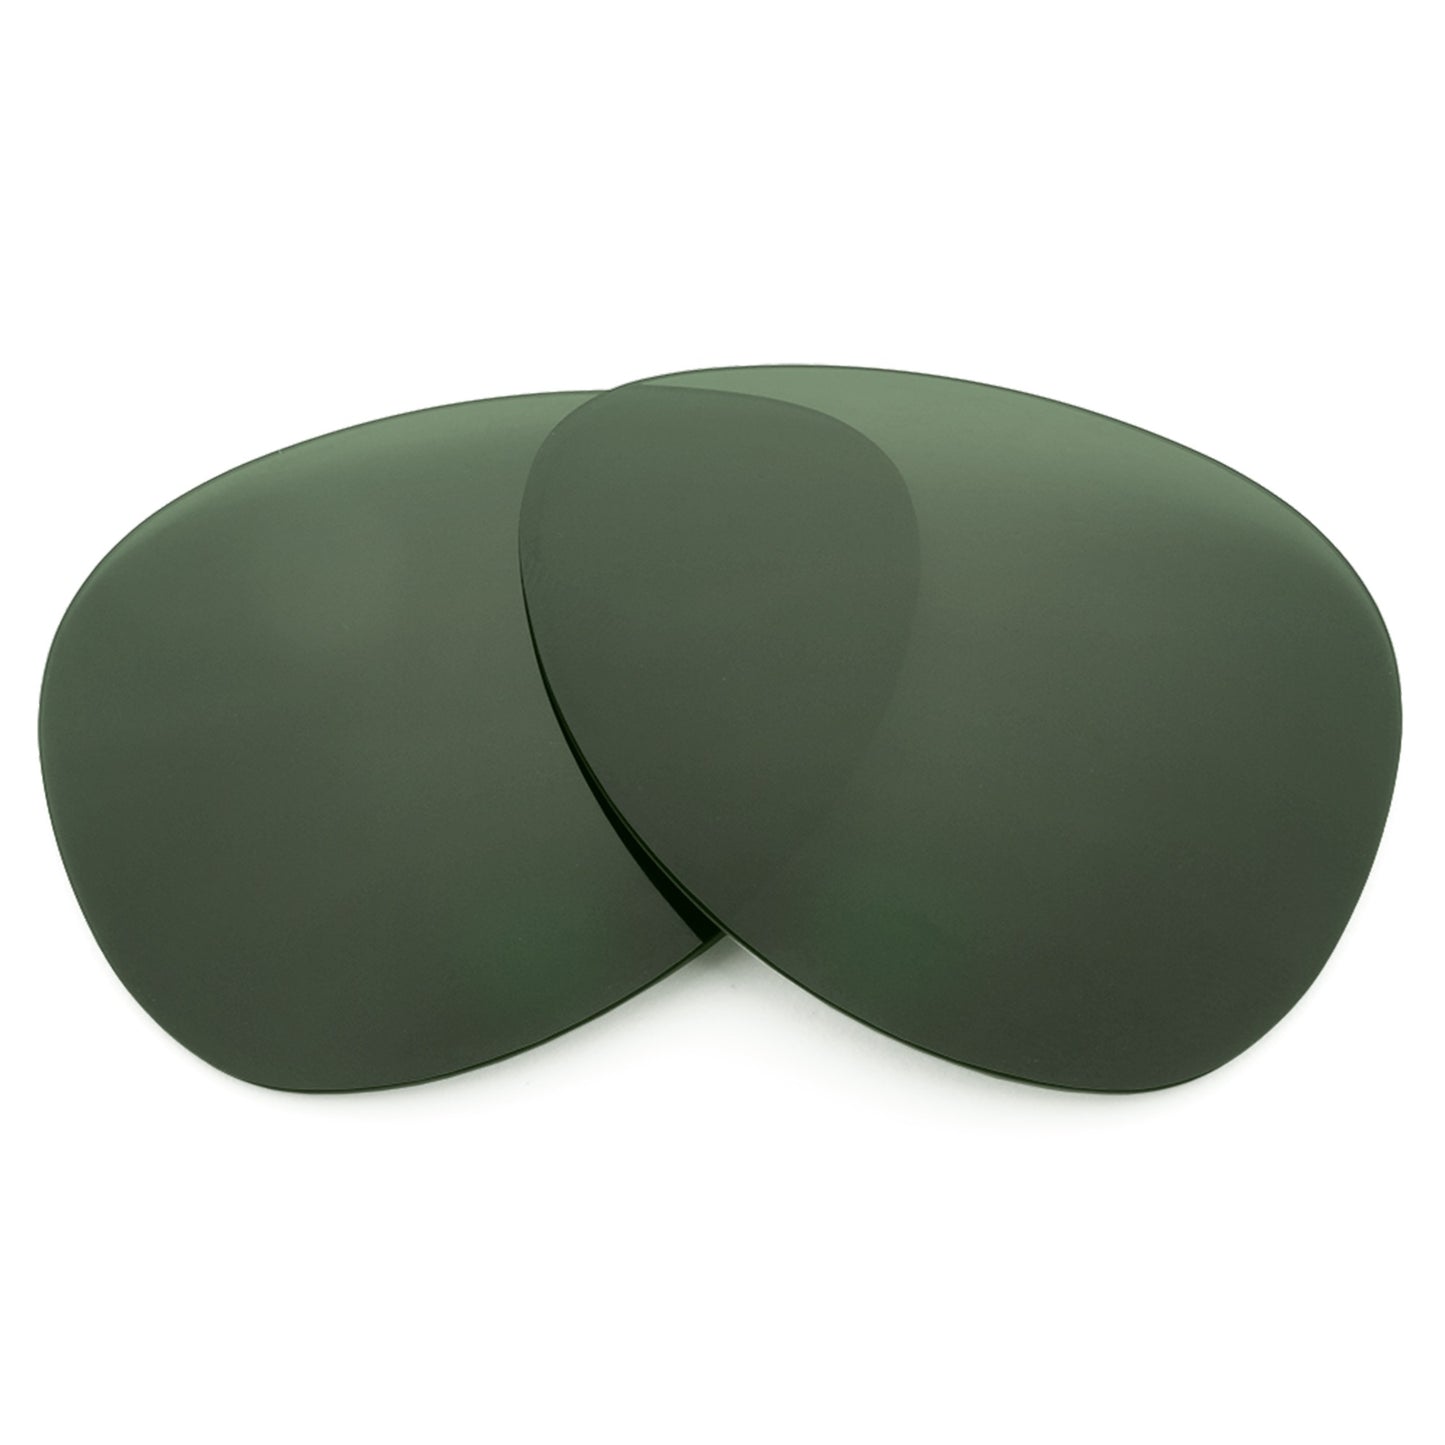 Revant replacement lenses for Ray-Ban Jackie Ohh RB4101 58mm Elite Polarized Gray Green